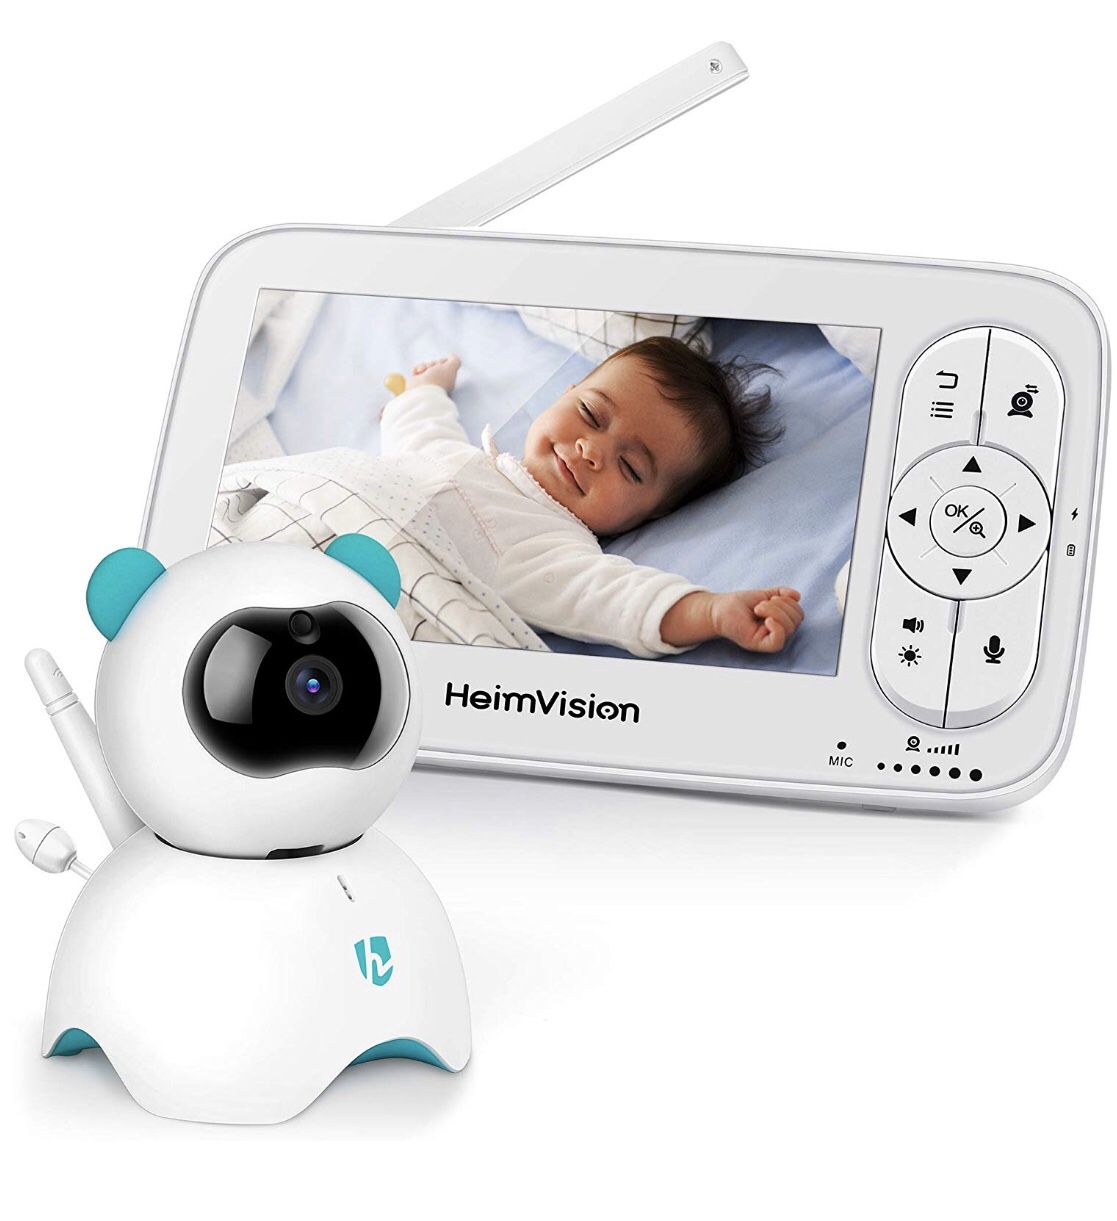 HM136 Video Baby Monitor, 5" LCD Display, 720P HD, Two-Way Audio, Temperature & Sound Alarm, Security Camera with 110° Wide Angle, Night Vision, Up t